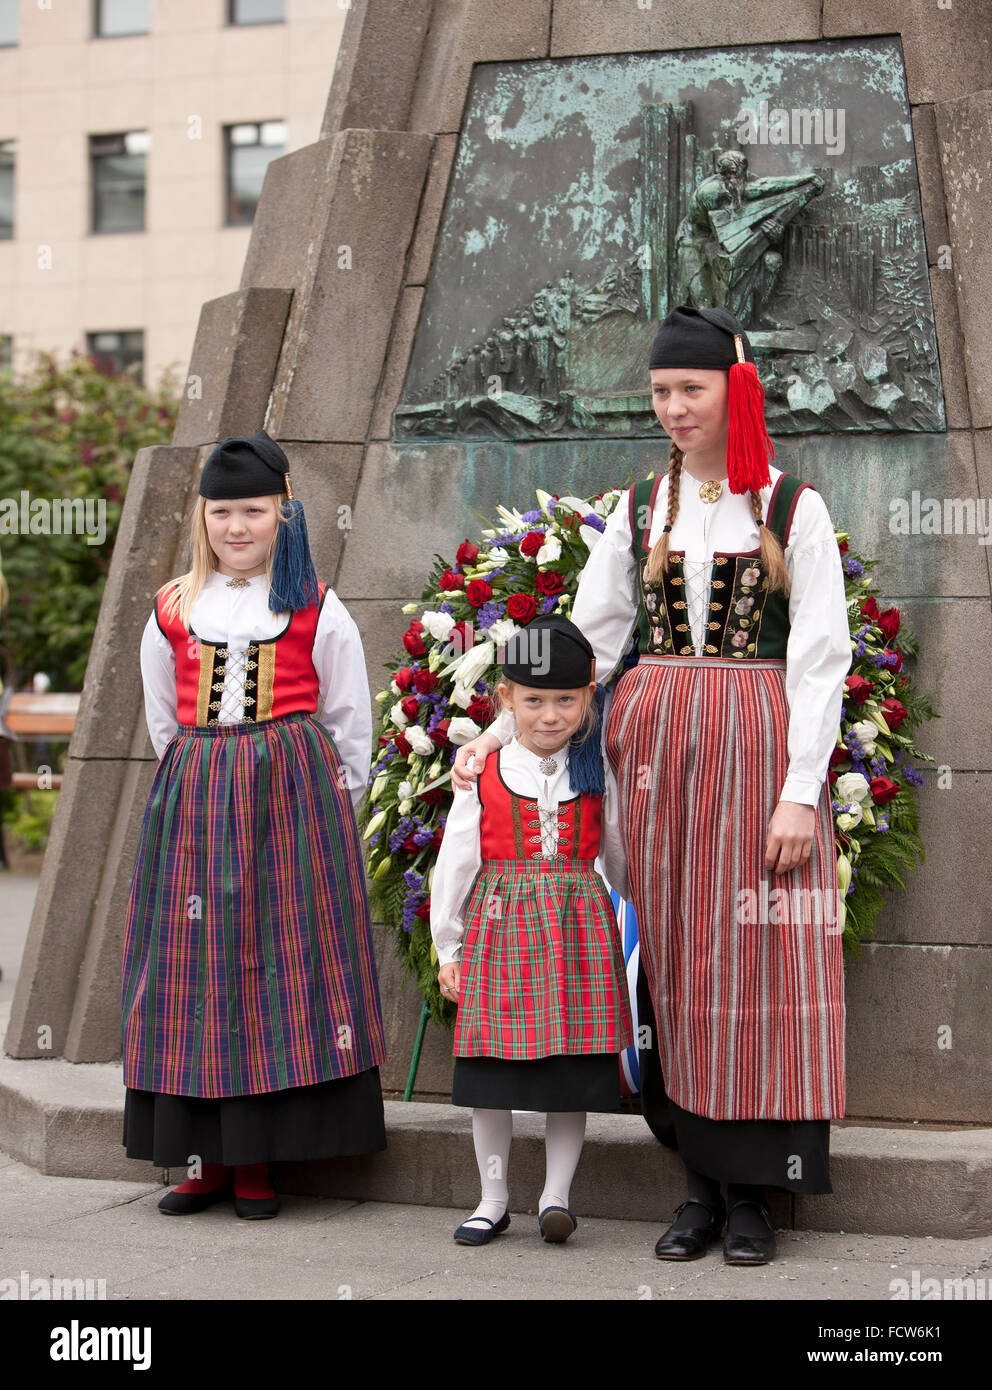 Mother and daughters dressed in traditional costumes, Icelandic Independence Day, Reykjavik, Iceland Stock Photo